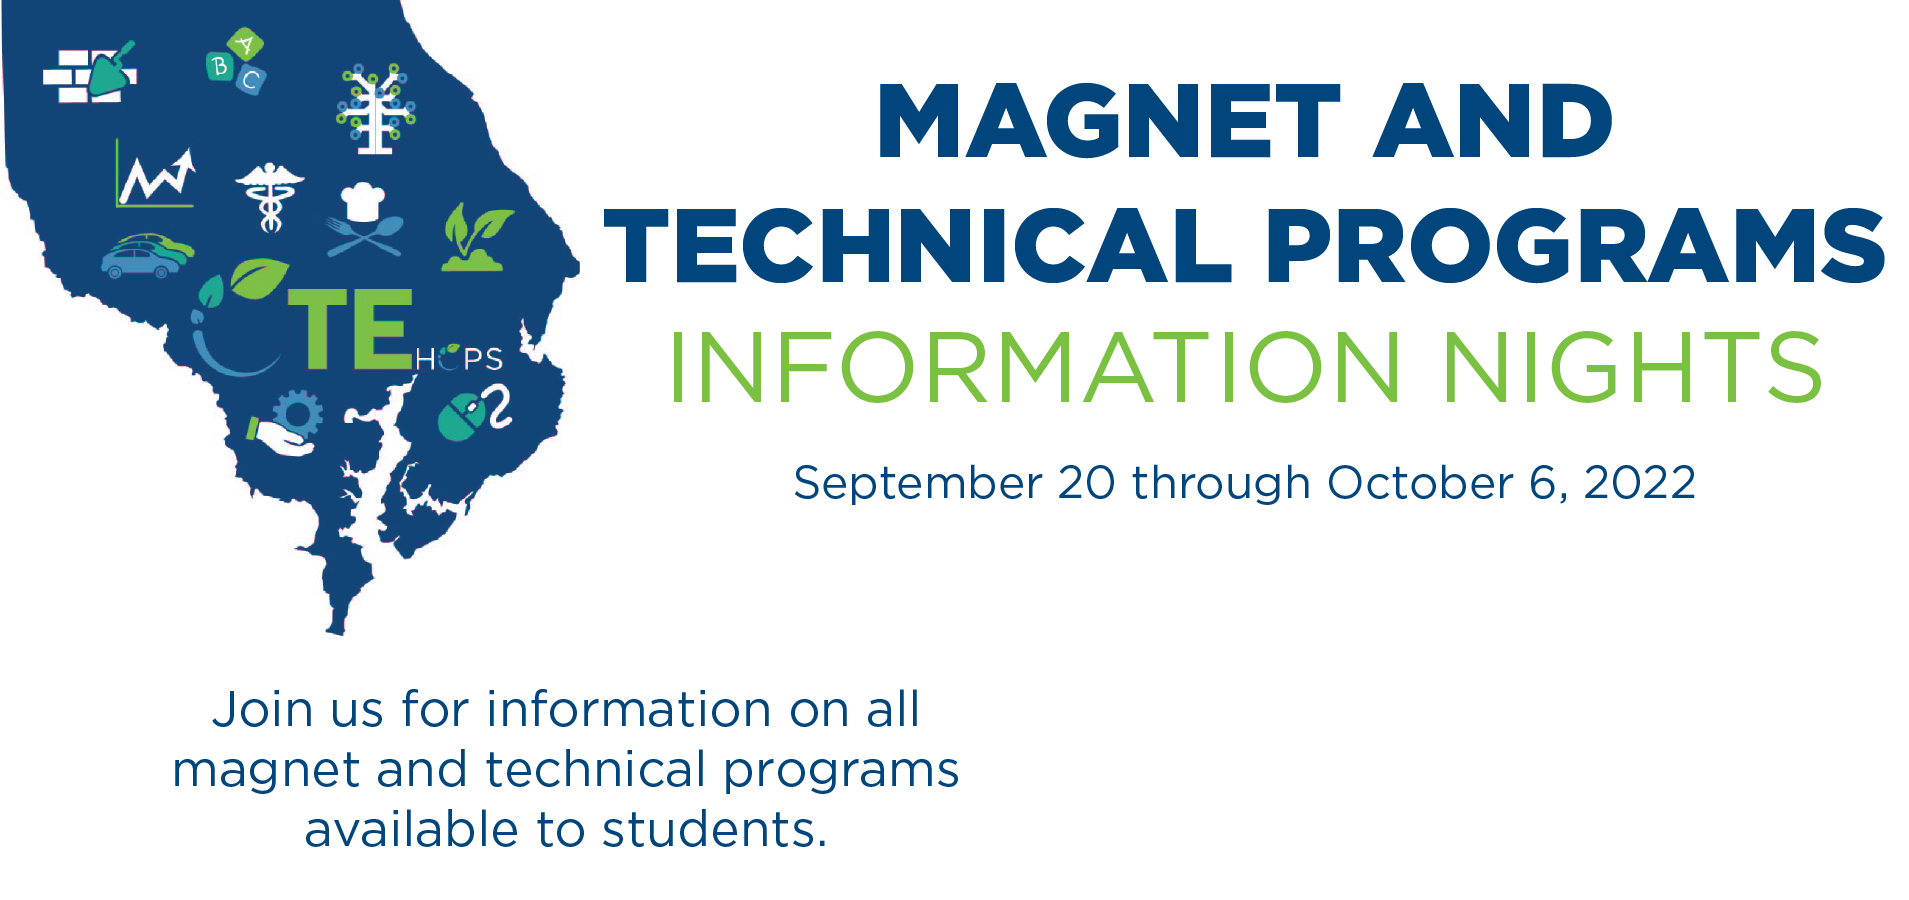 Magnet and Technical Programs Information Nights